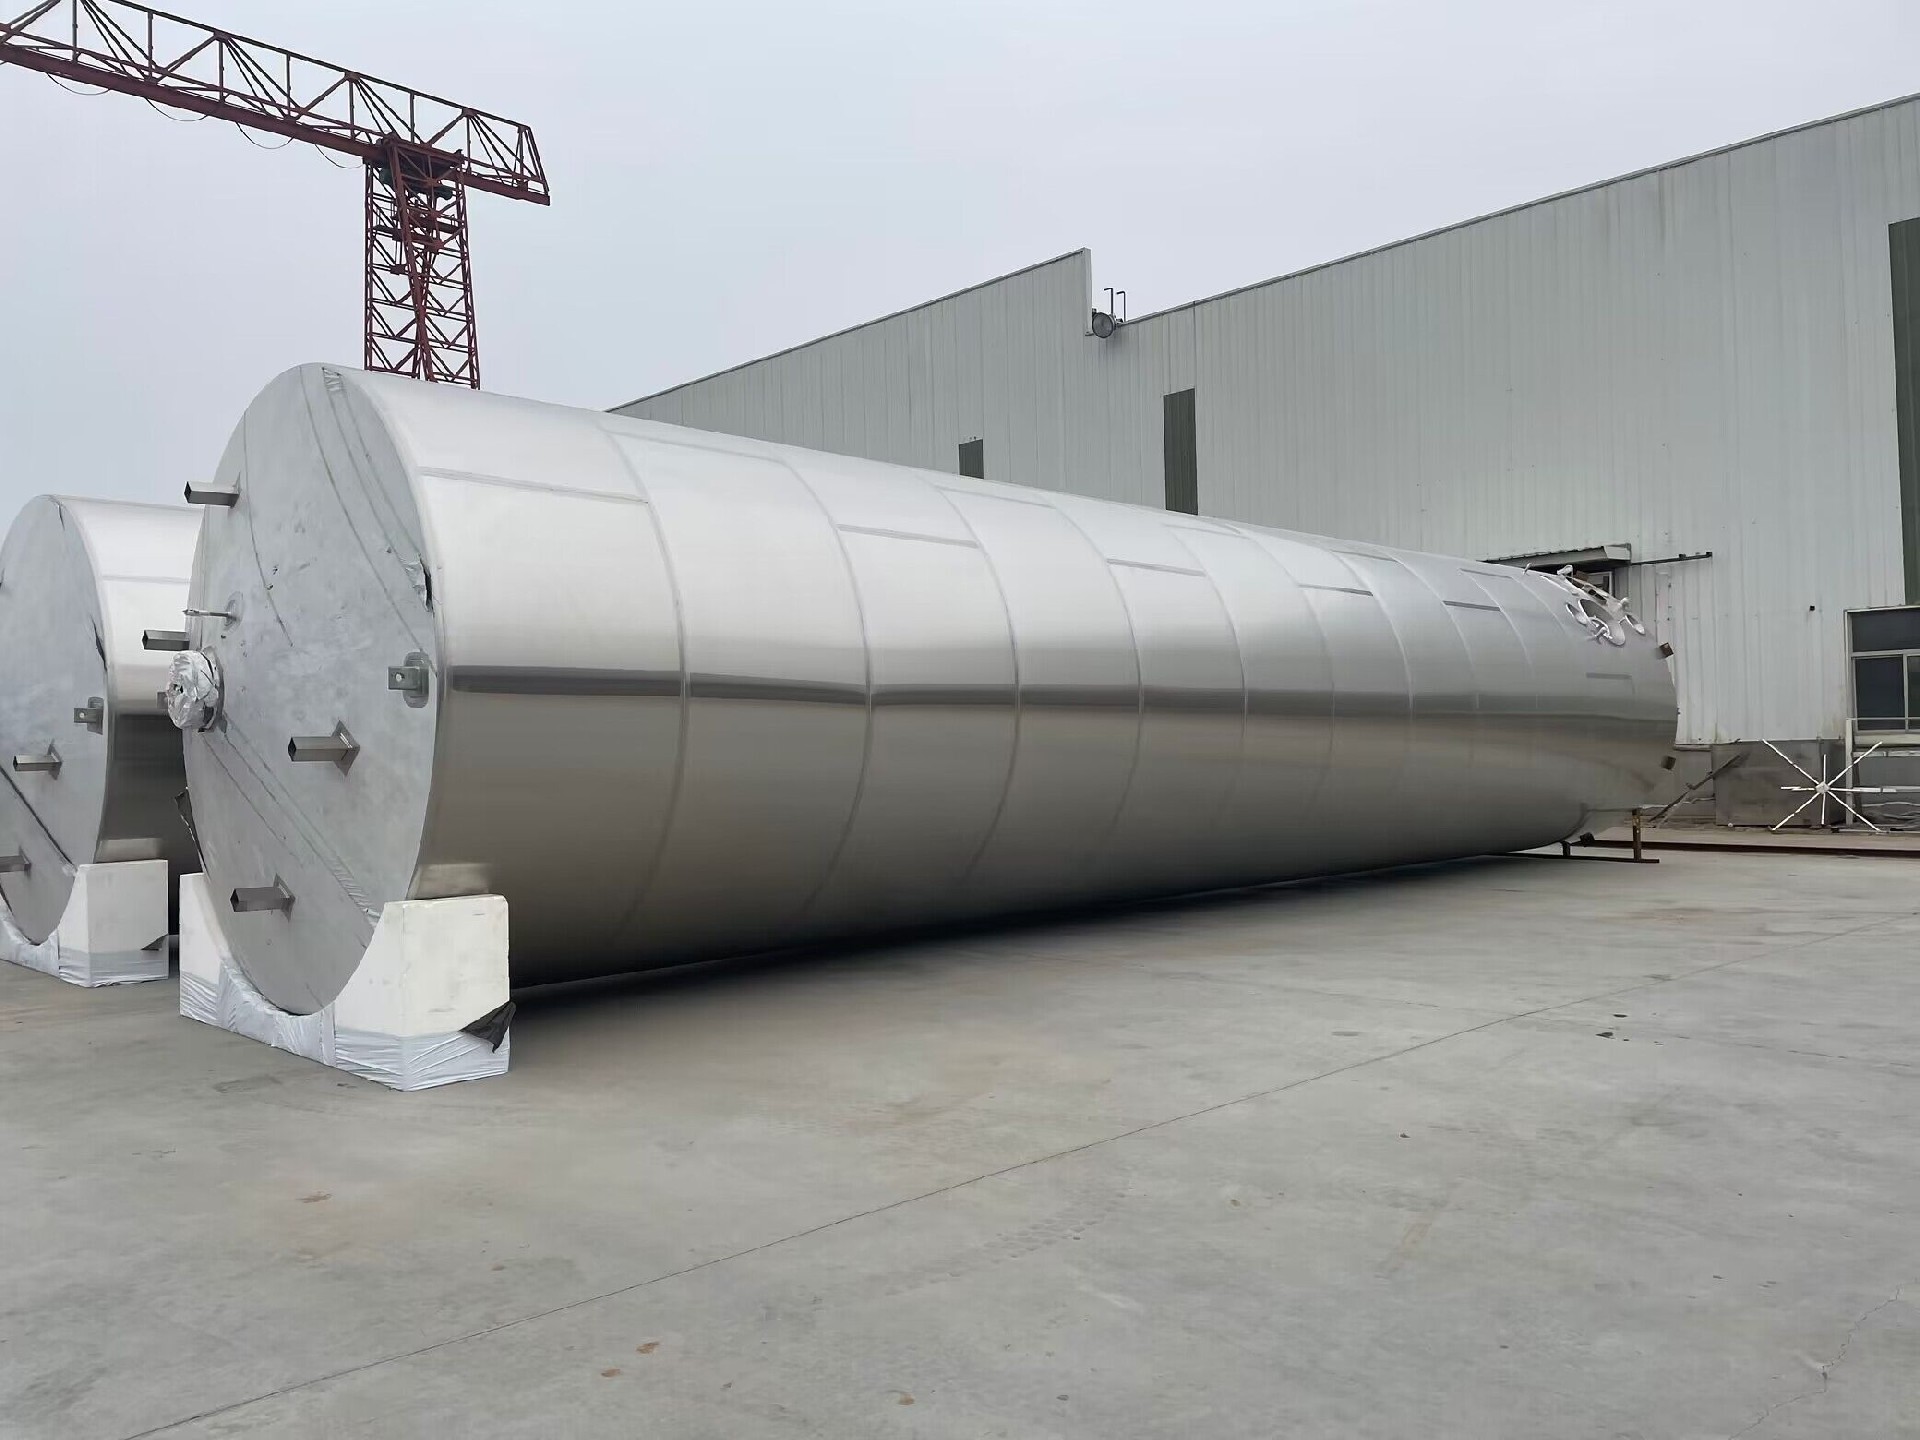 Other stainless steel tank